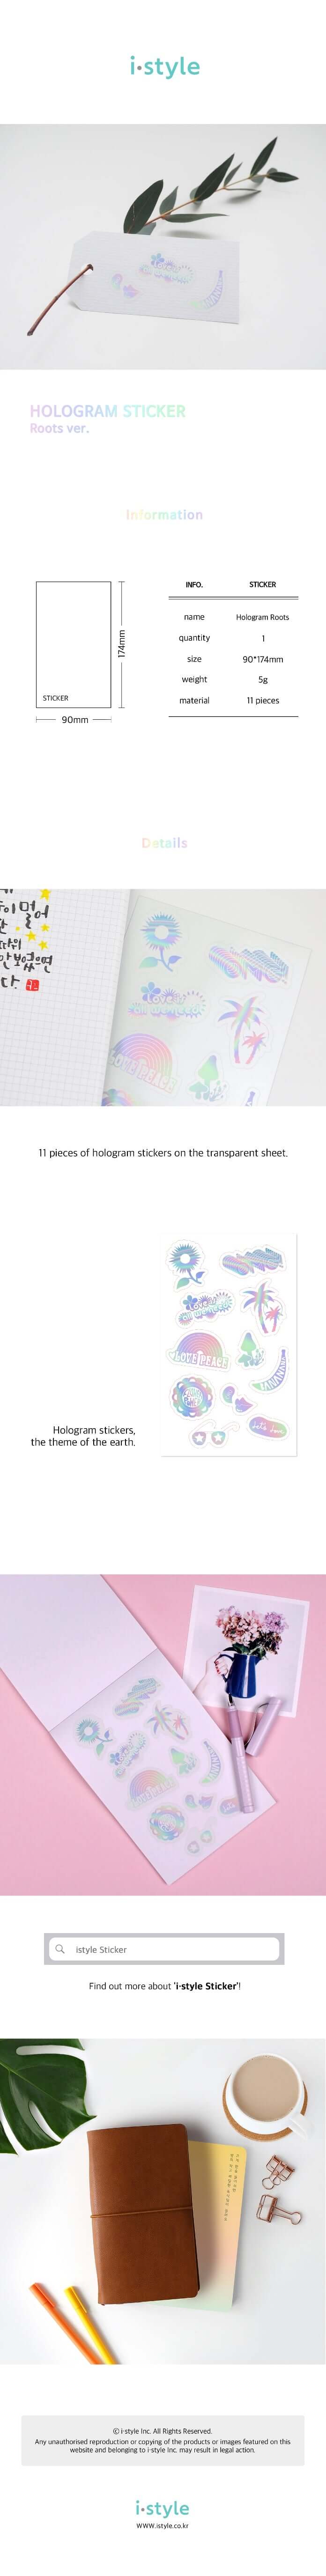 Shil Note Hologram Sticker (Roots)